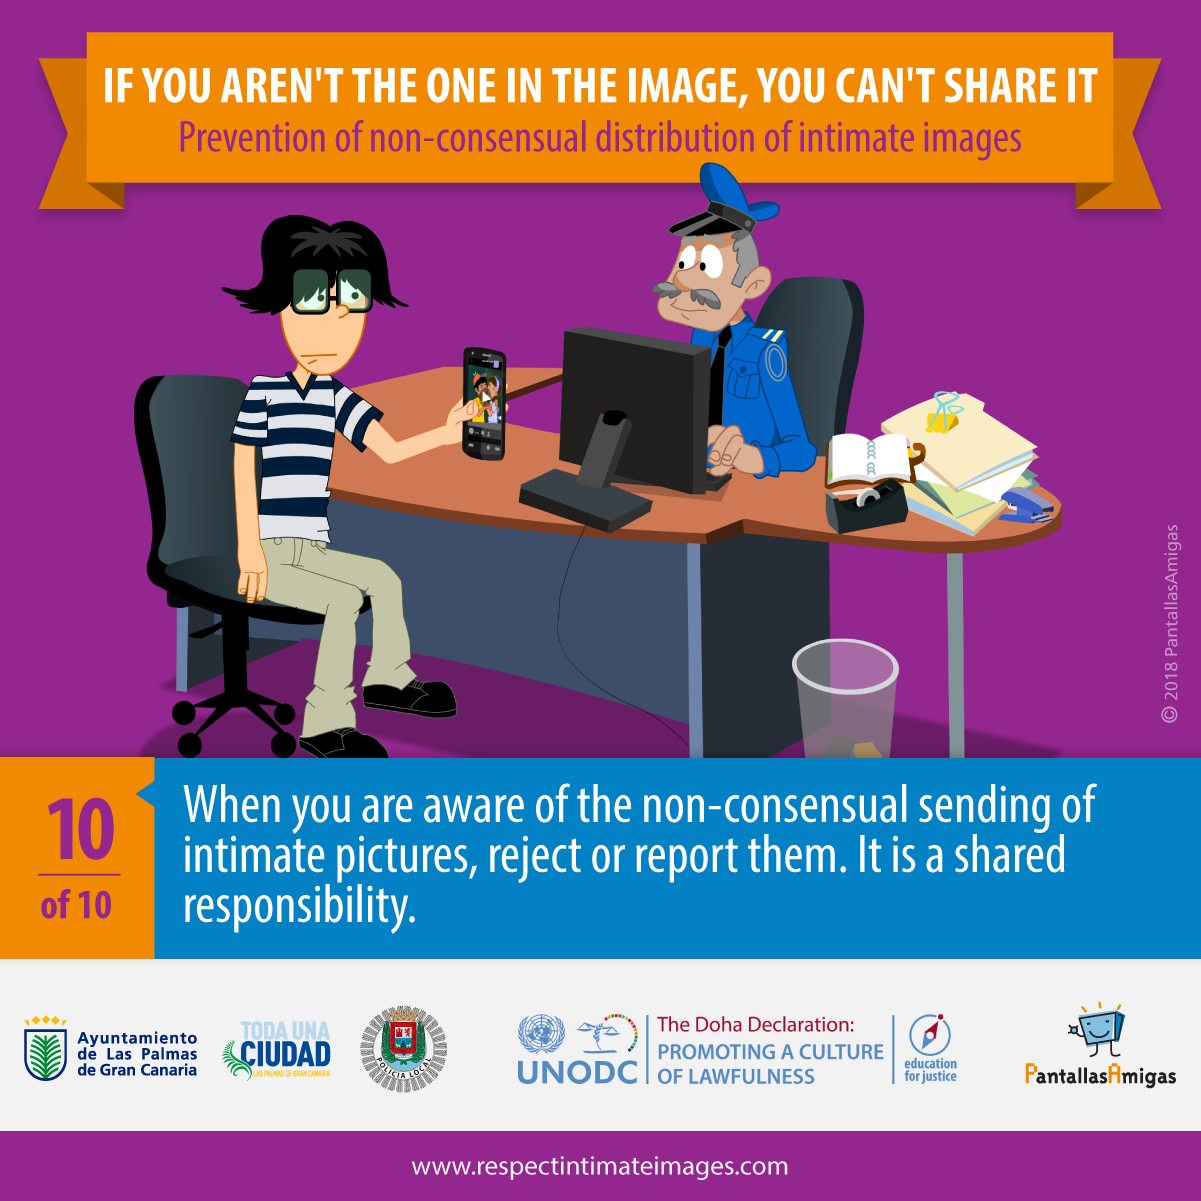 When you are aware of the non-consensual sending of intimate pictures, reject or report them. It is a shared responsibility. 